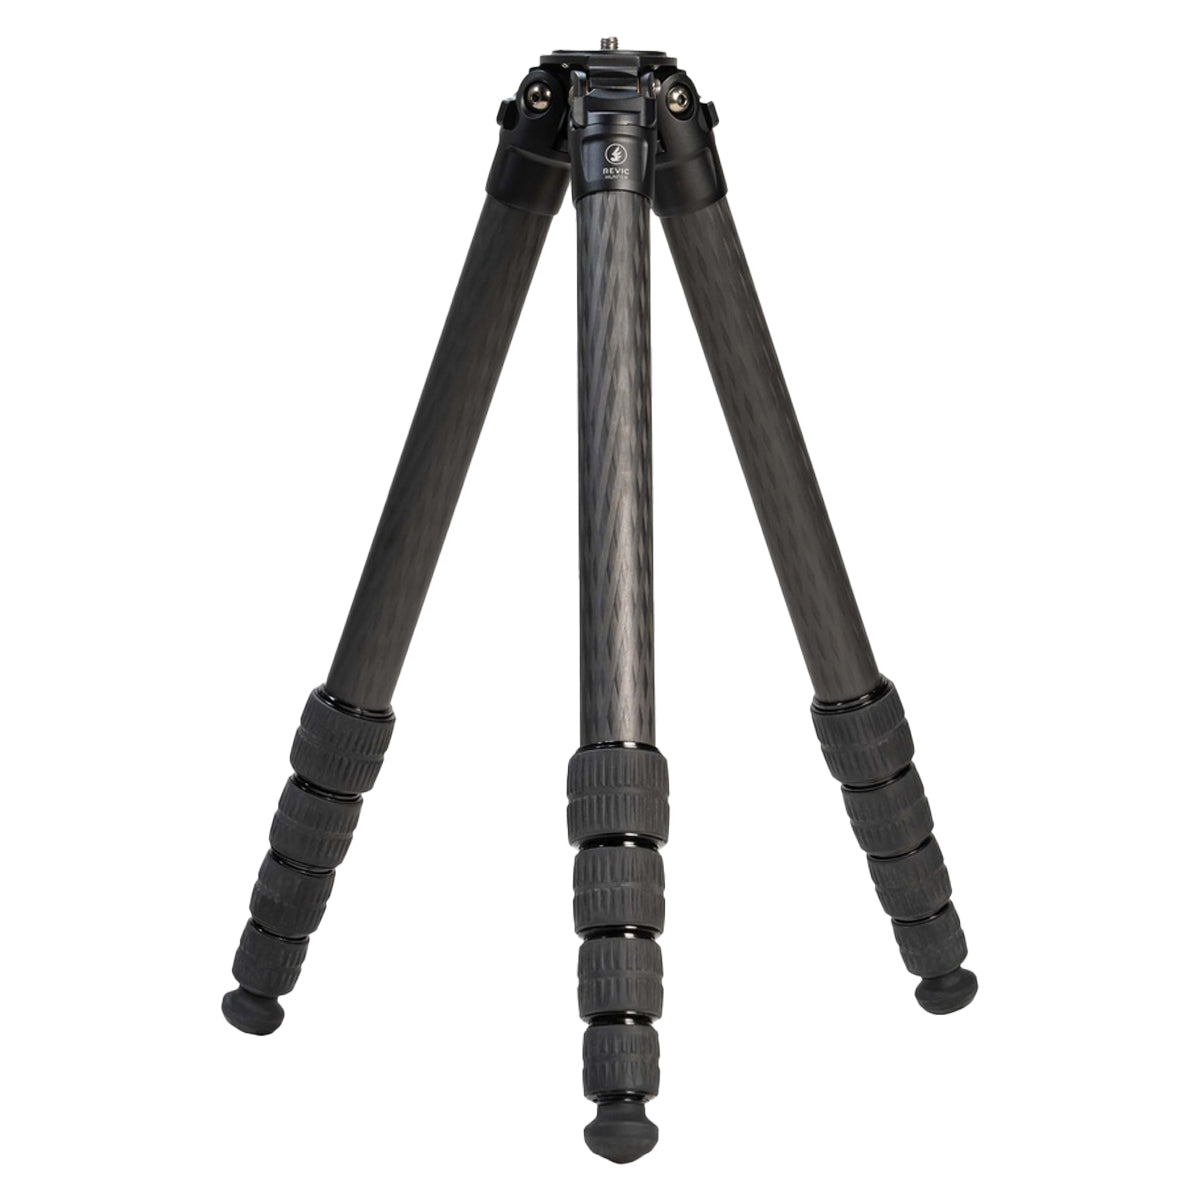 Revic Hunter UL Tripod in  by GOHUNT | Revic - GOHUNT Shop